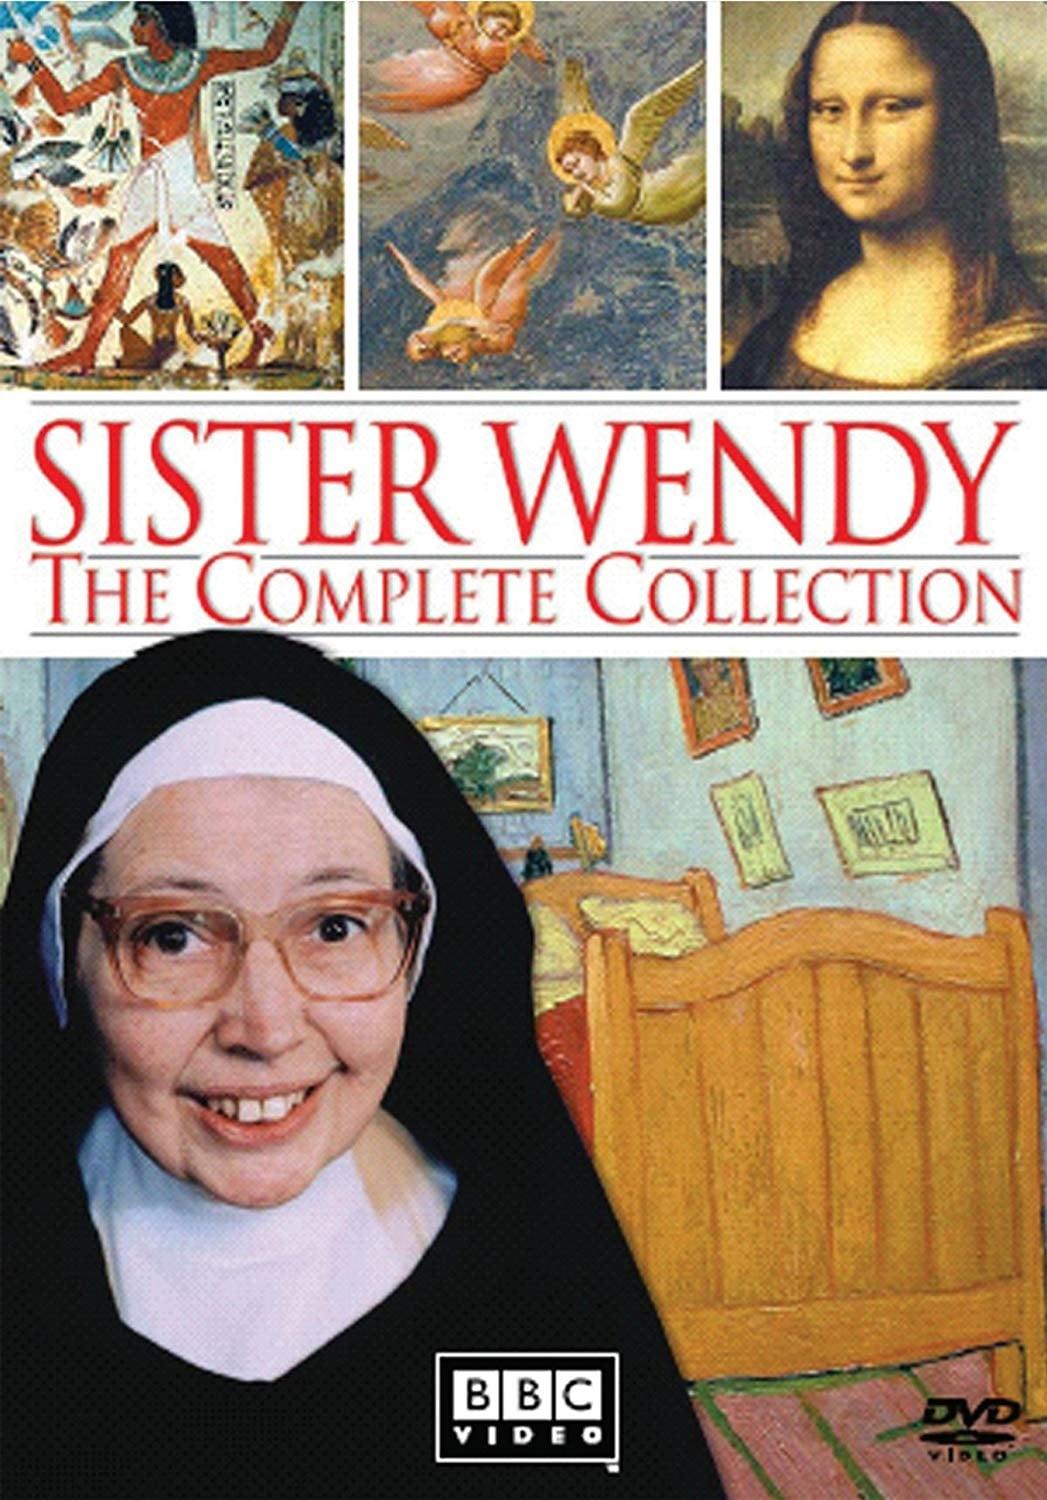 Sister Wendy's Story of Painting poster